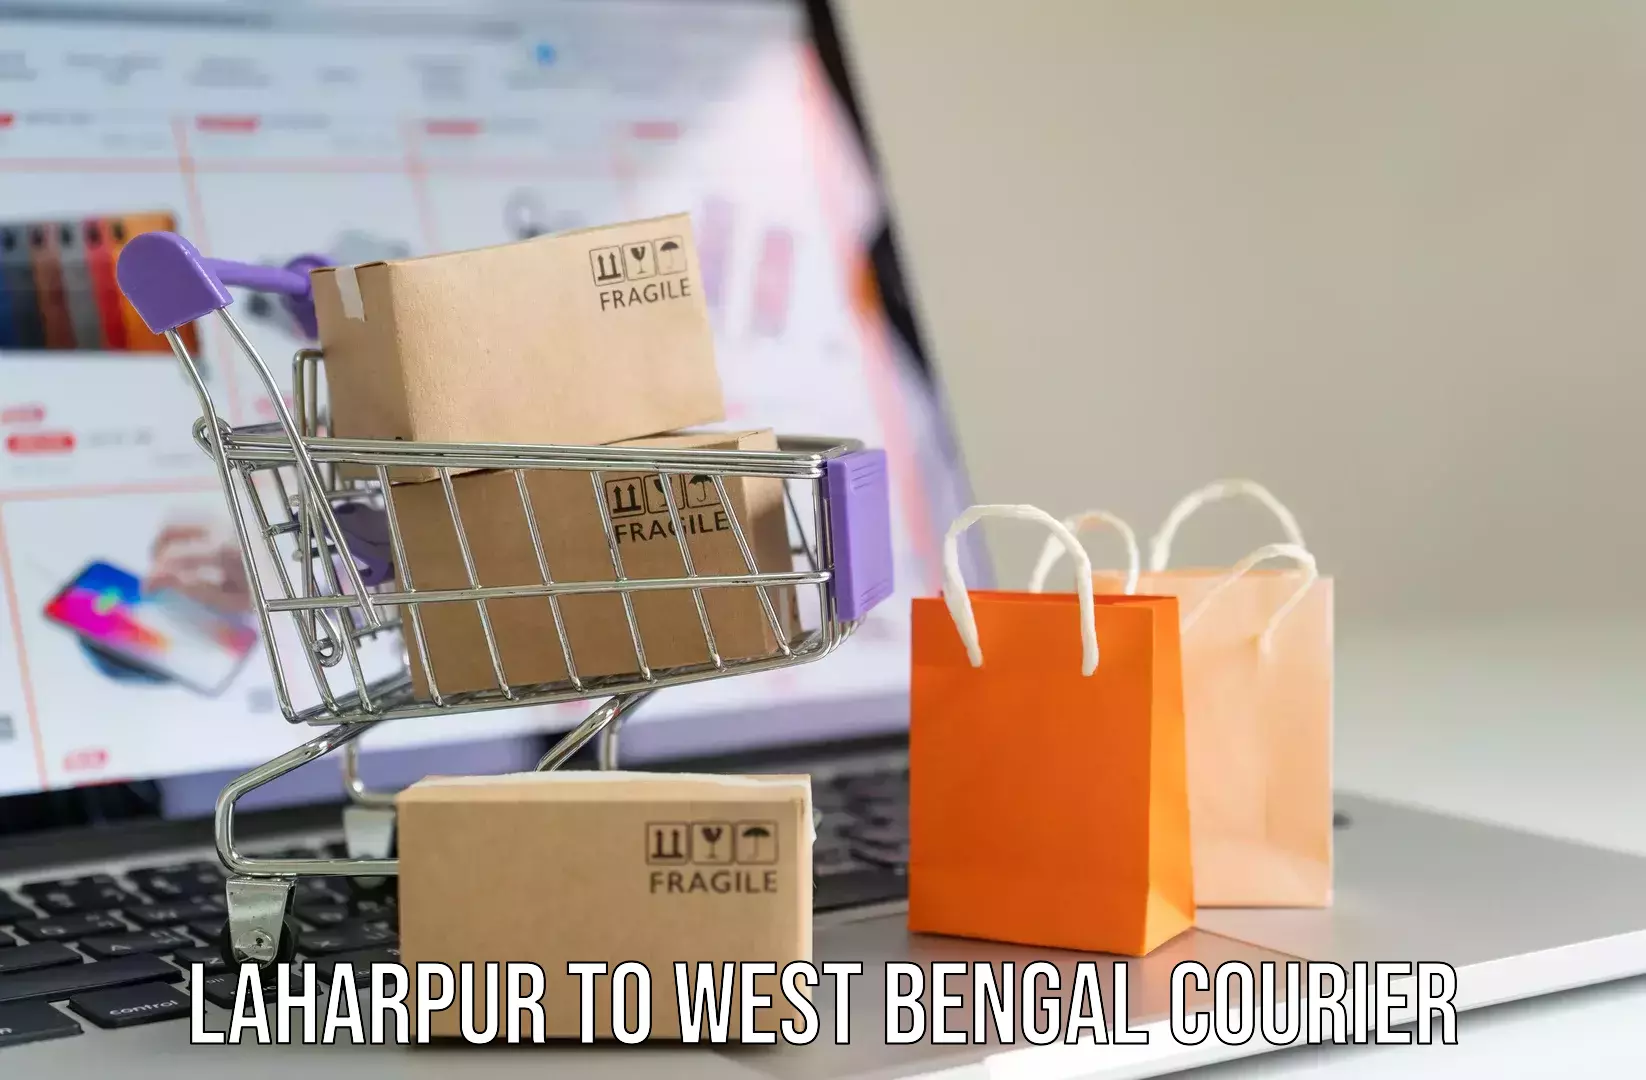 Luggage transport deals Laharpur to West Bengal